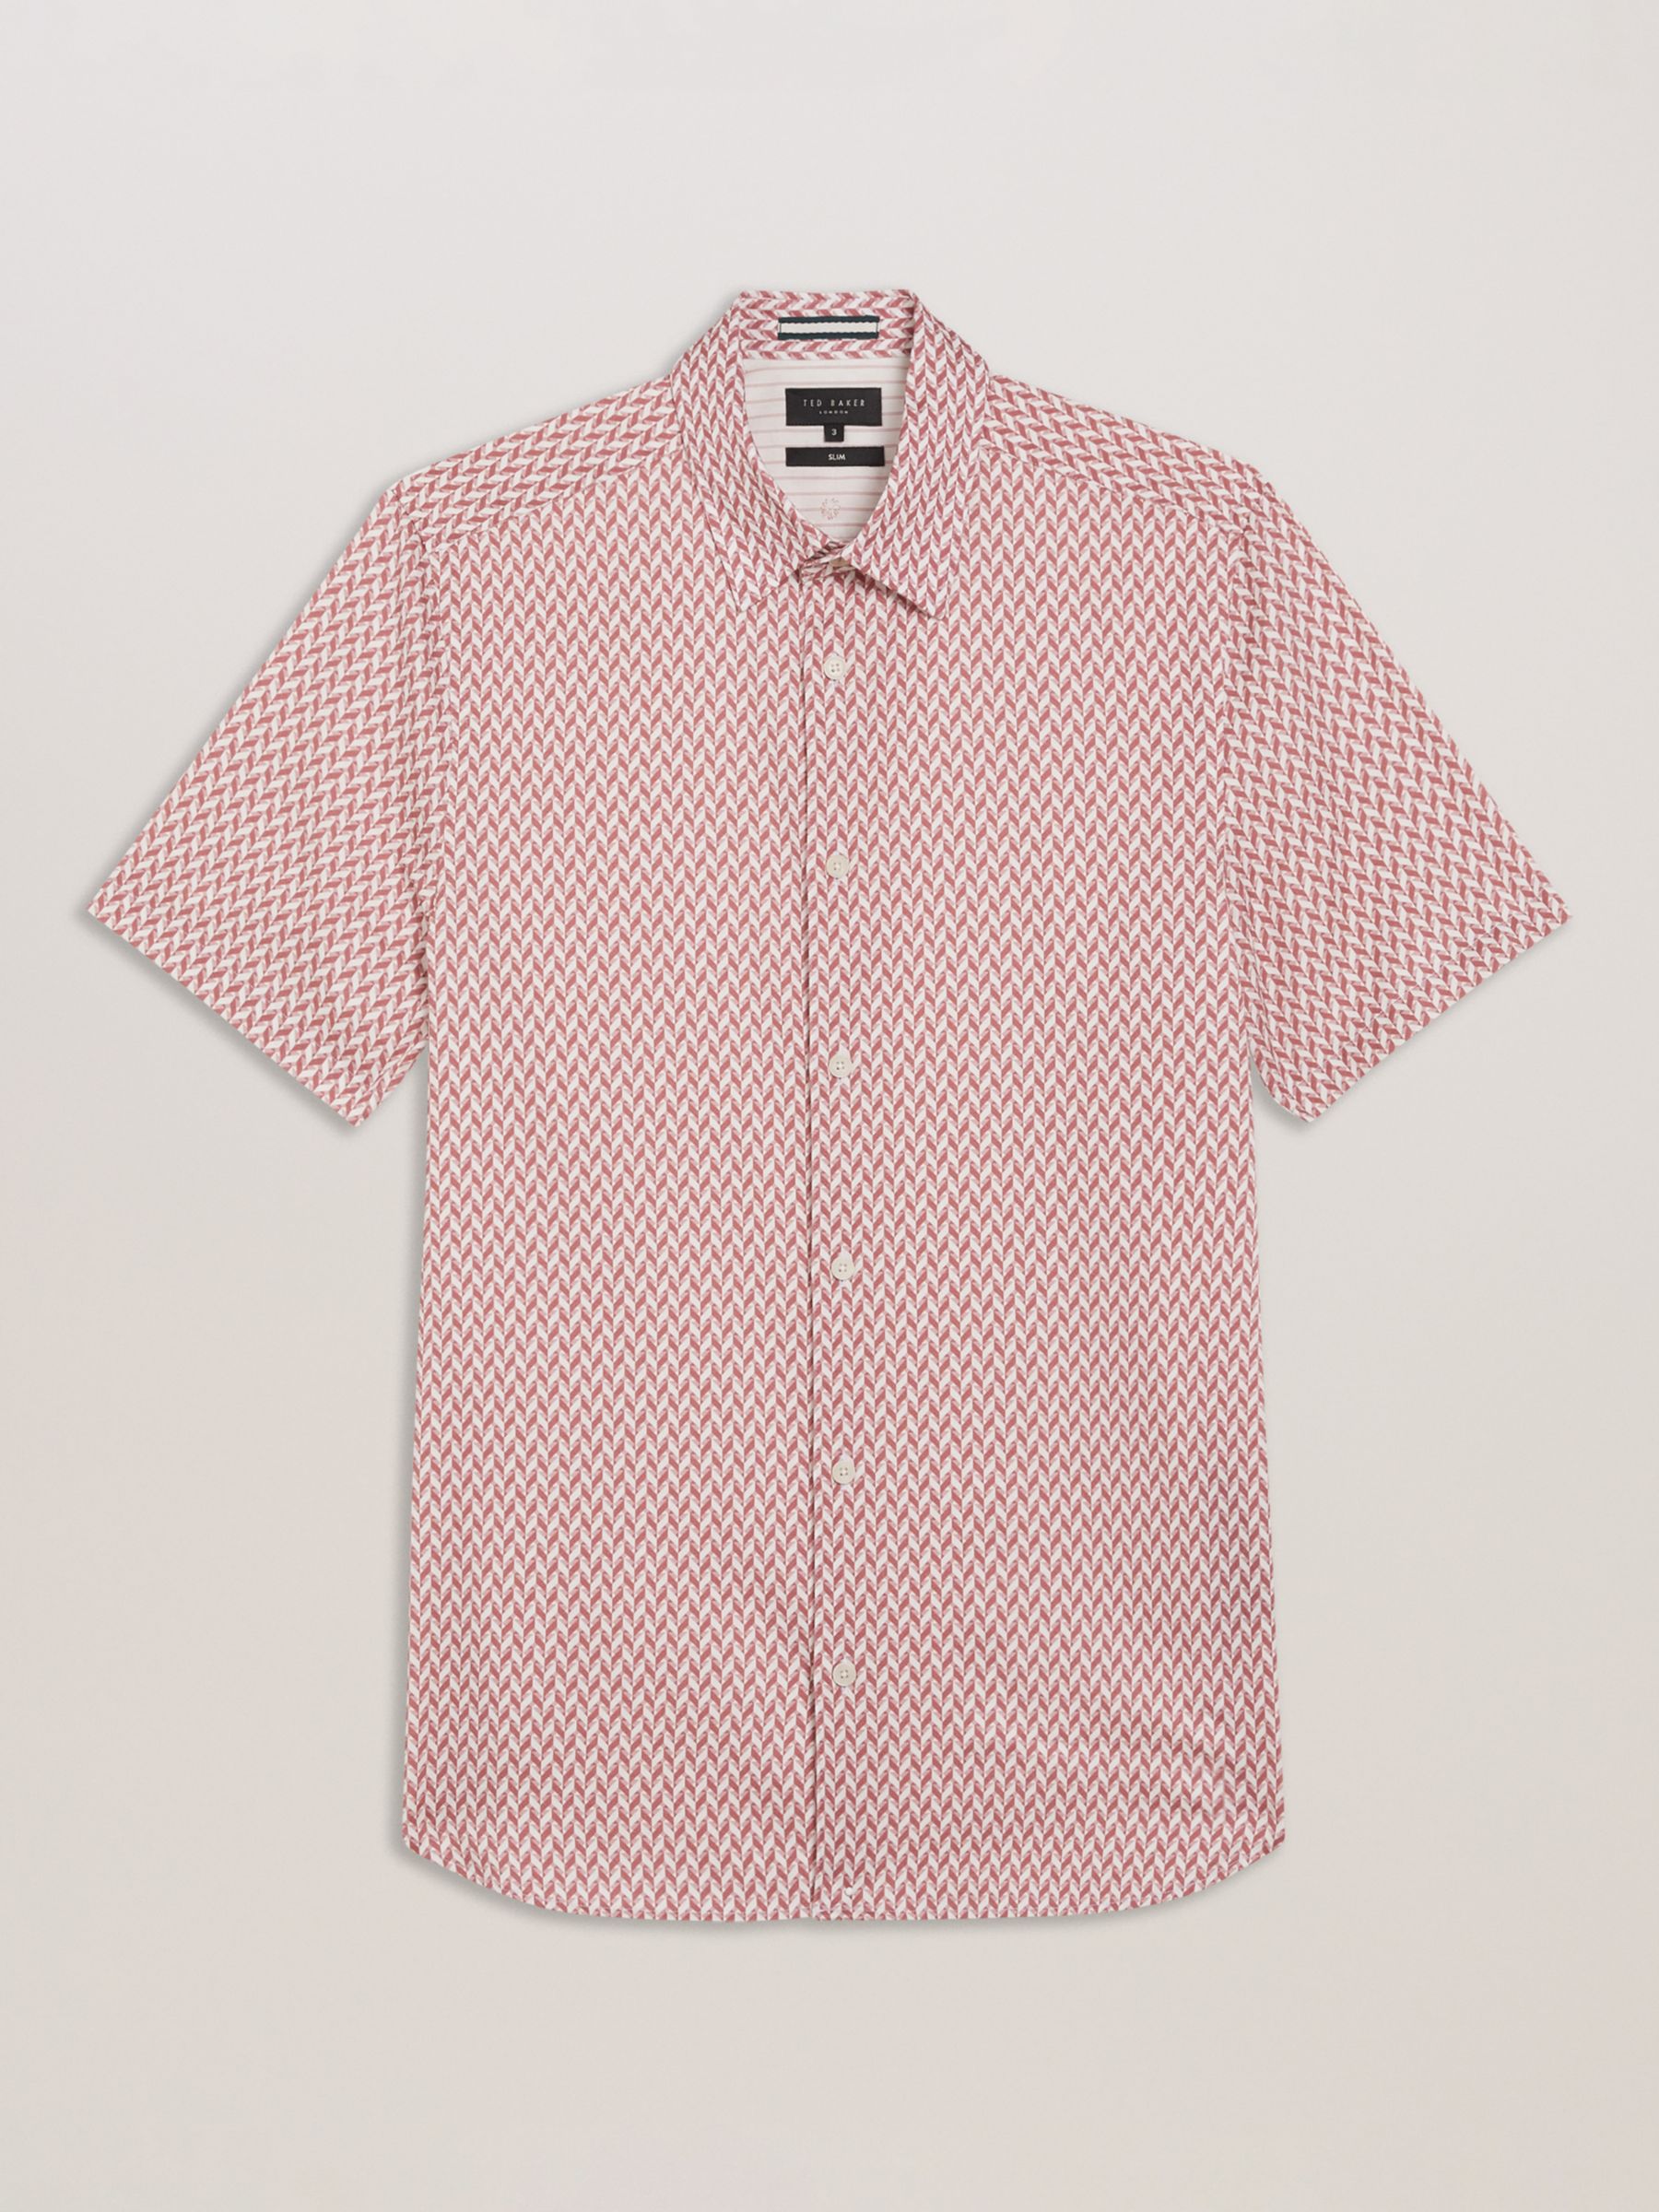 Ted Baker Lacesho Geo Print Short Sleeve Shirt, Pink Mid, S